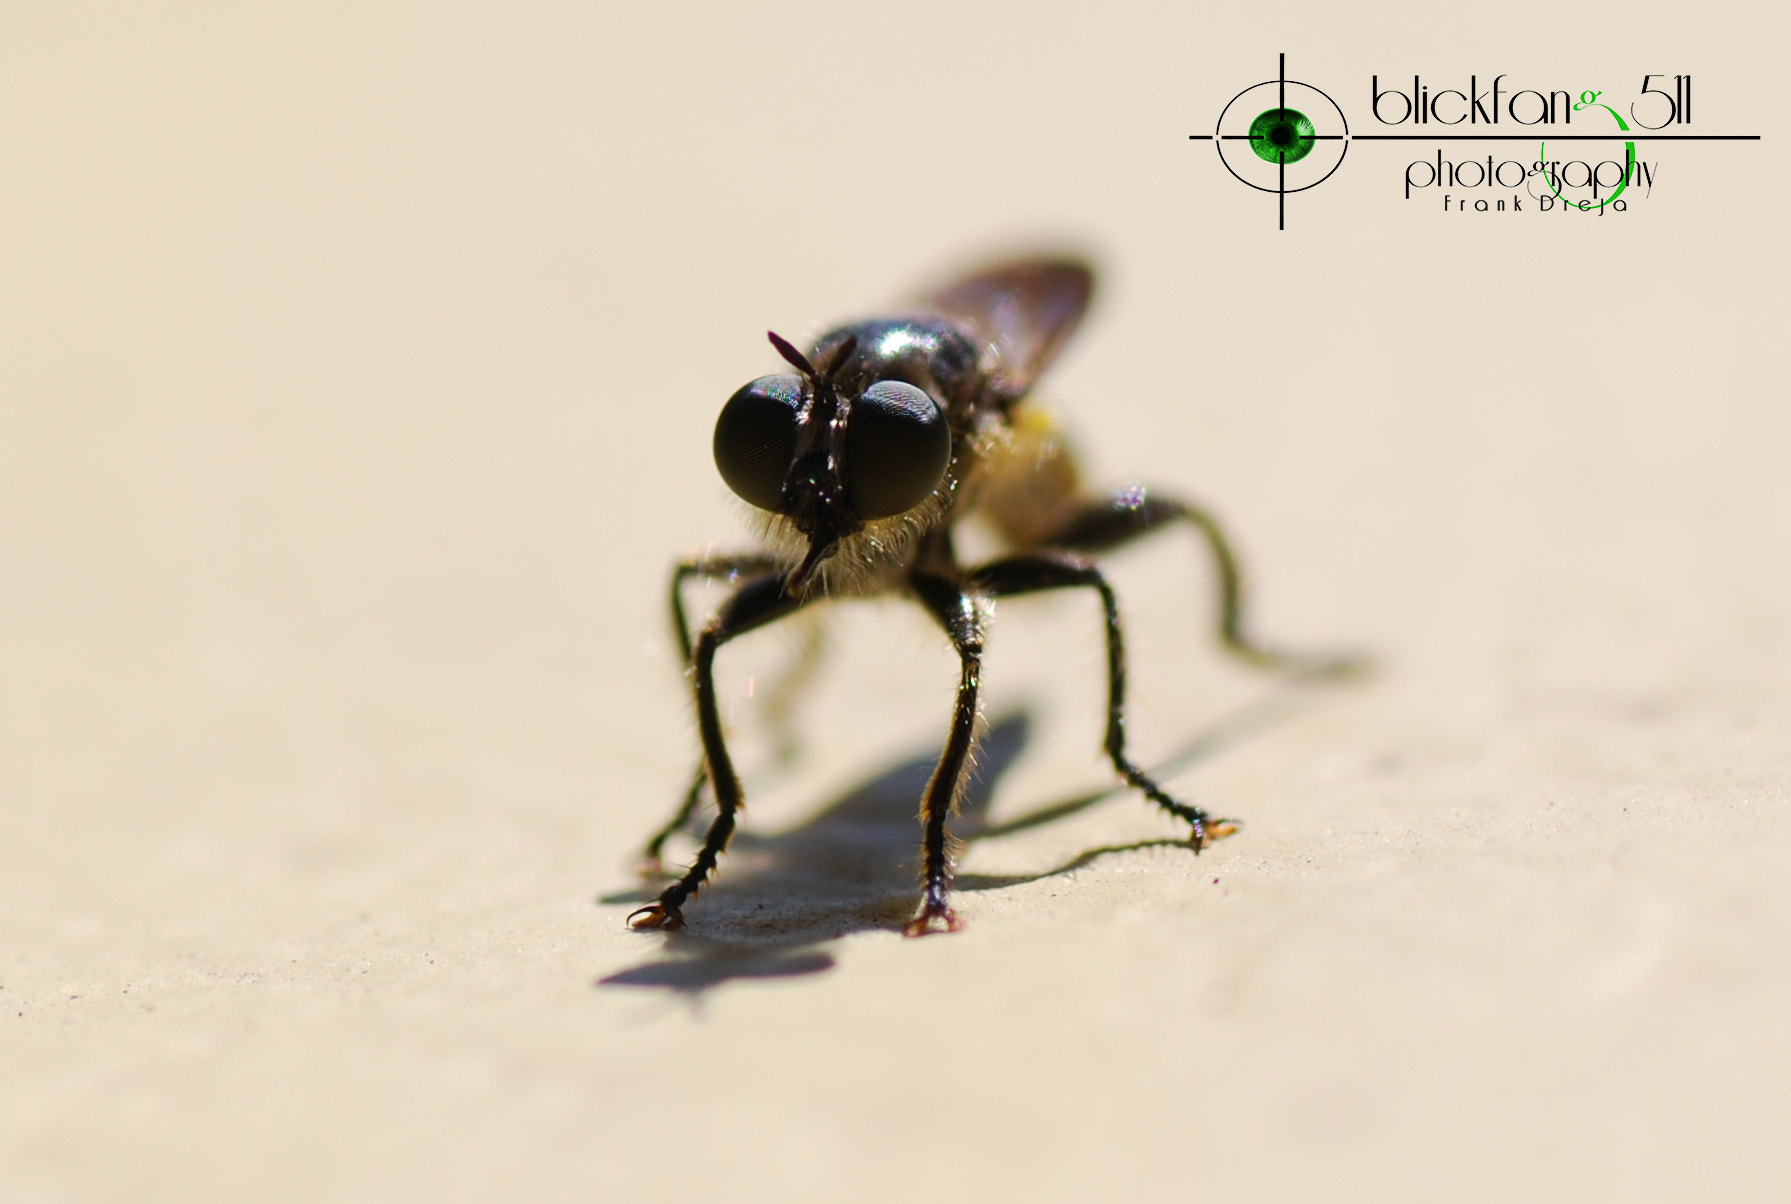 Nikon D80 + Tamron SP 90mm F2.8 Di VC USD 1:1 Macro sample photo. The relaxing fly photography